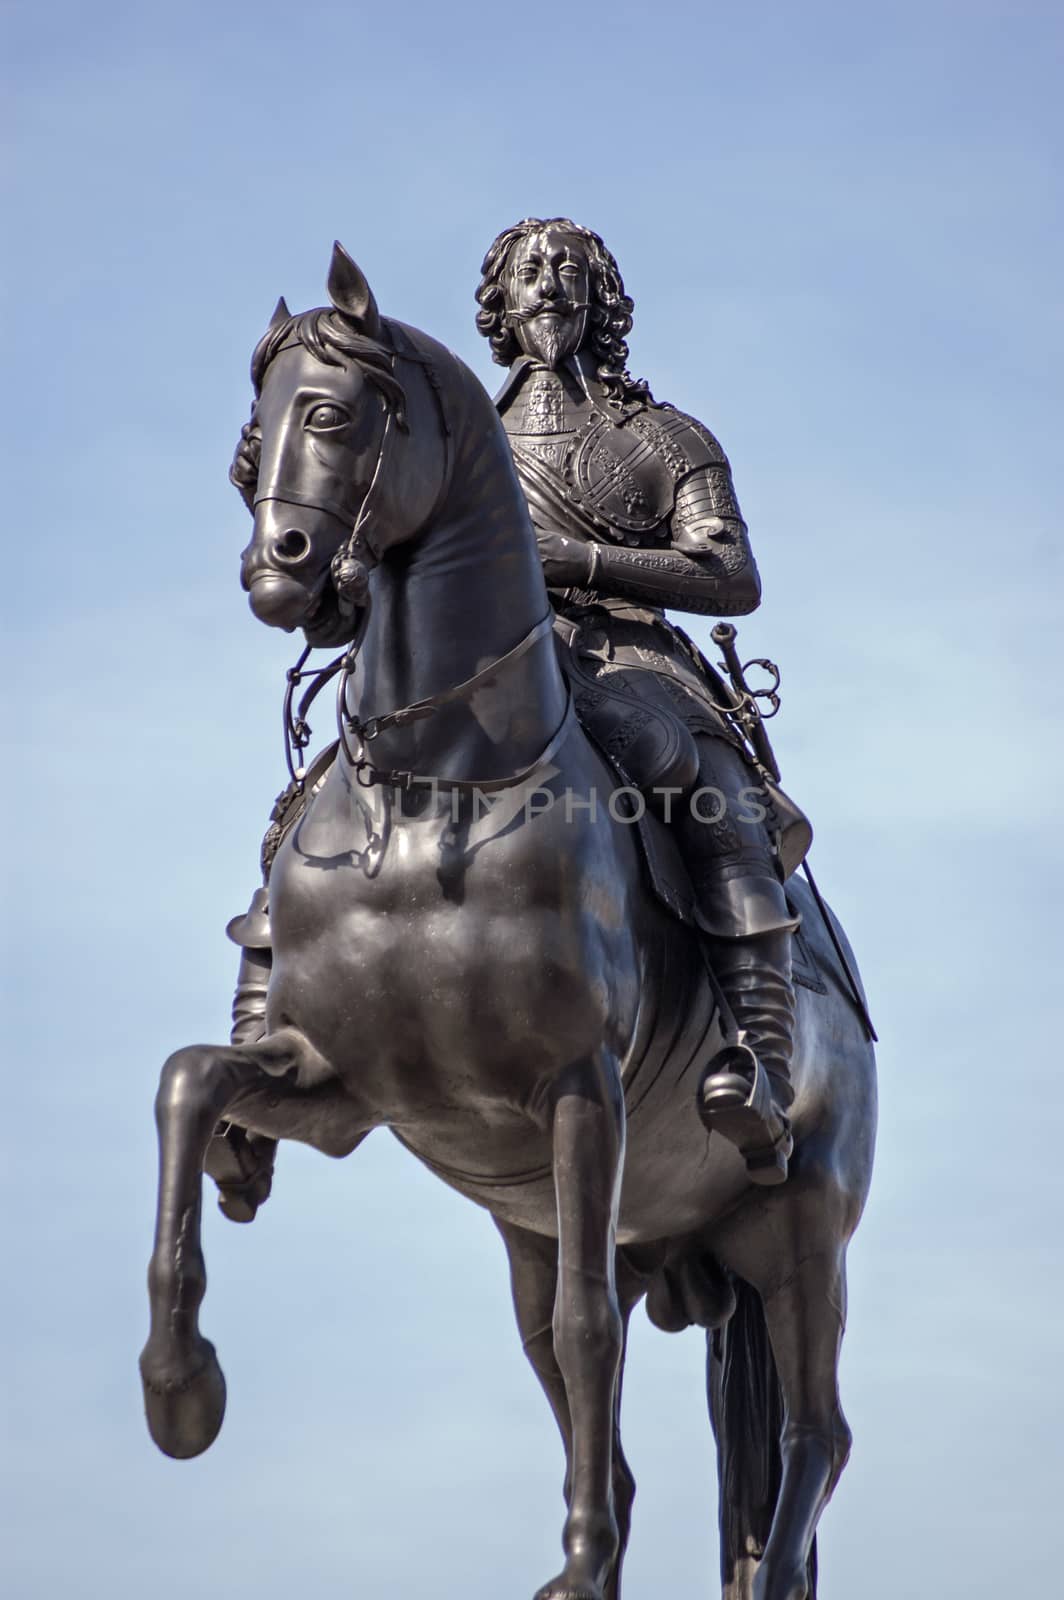 Equine statue of King Charles I (1600-1649), the oldest statue on Trafalgar Square, London. Carved in 1638 by Hubert Le Sueur. Public monument on display for hundreds of years.